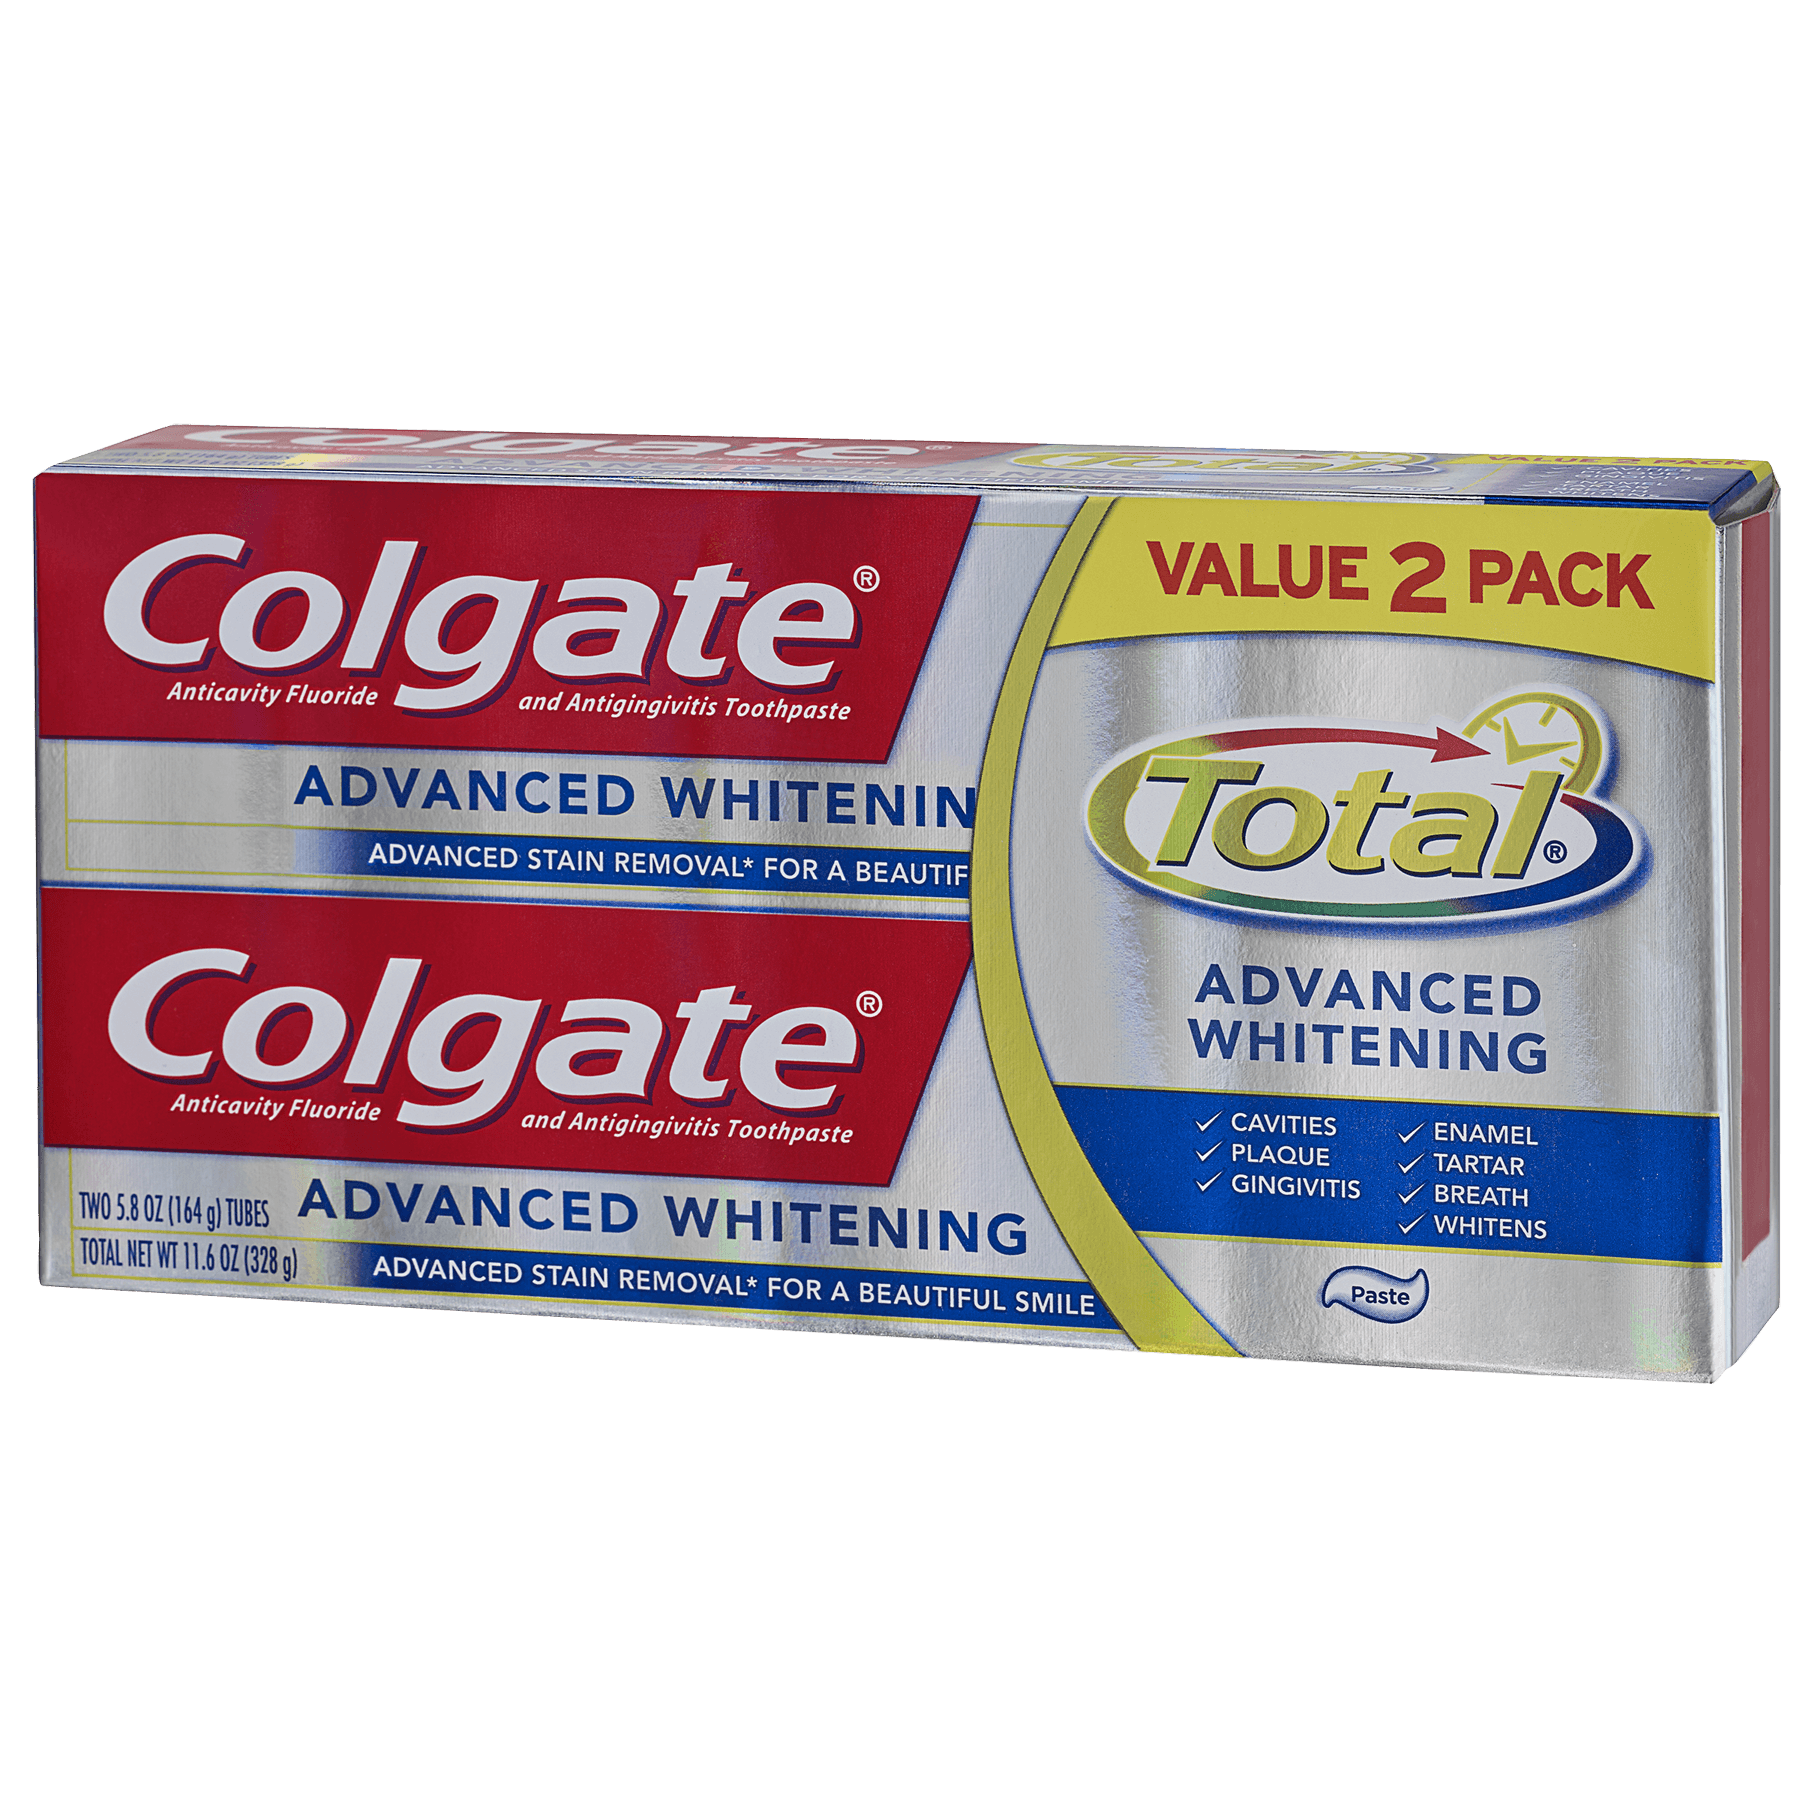 Colgate Total Advanced Whitening Toothpaste Twin Pack - 11.6 ounce - image 2 of 4